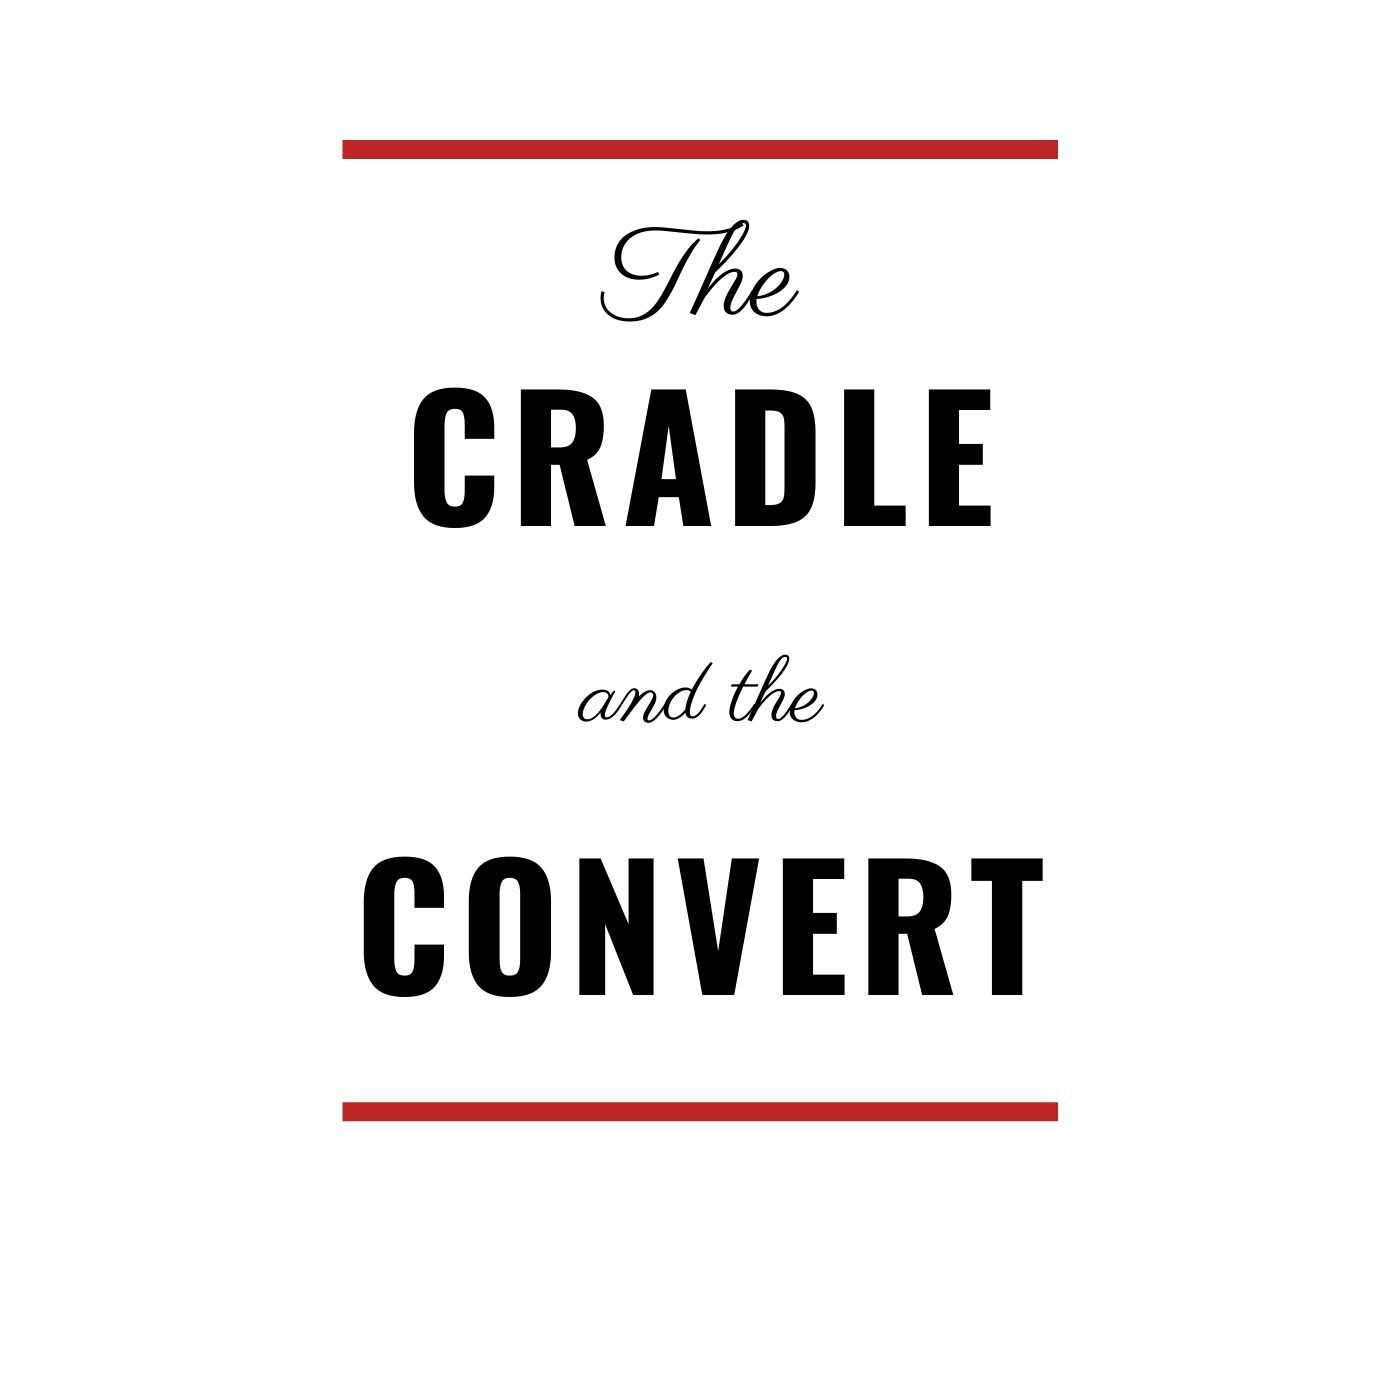 The Cradle and the Convert